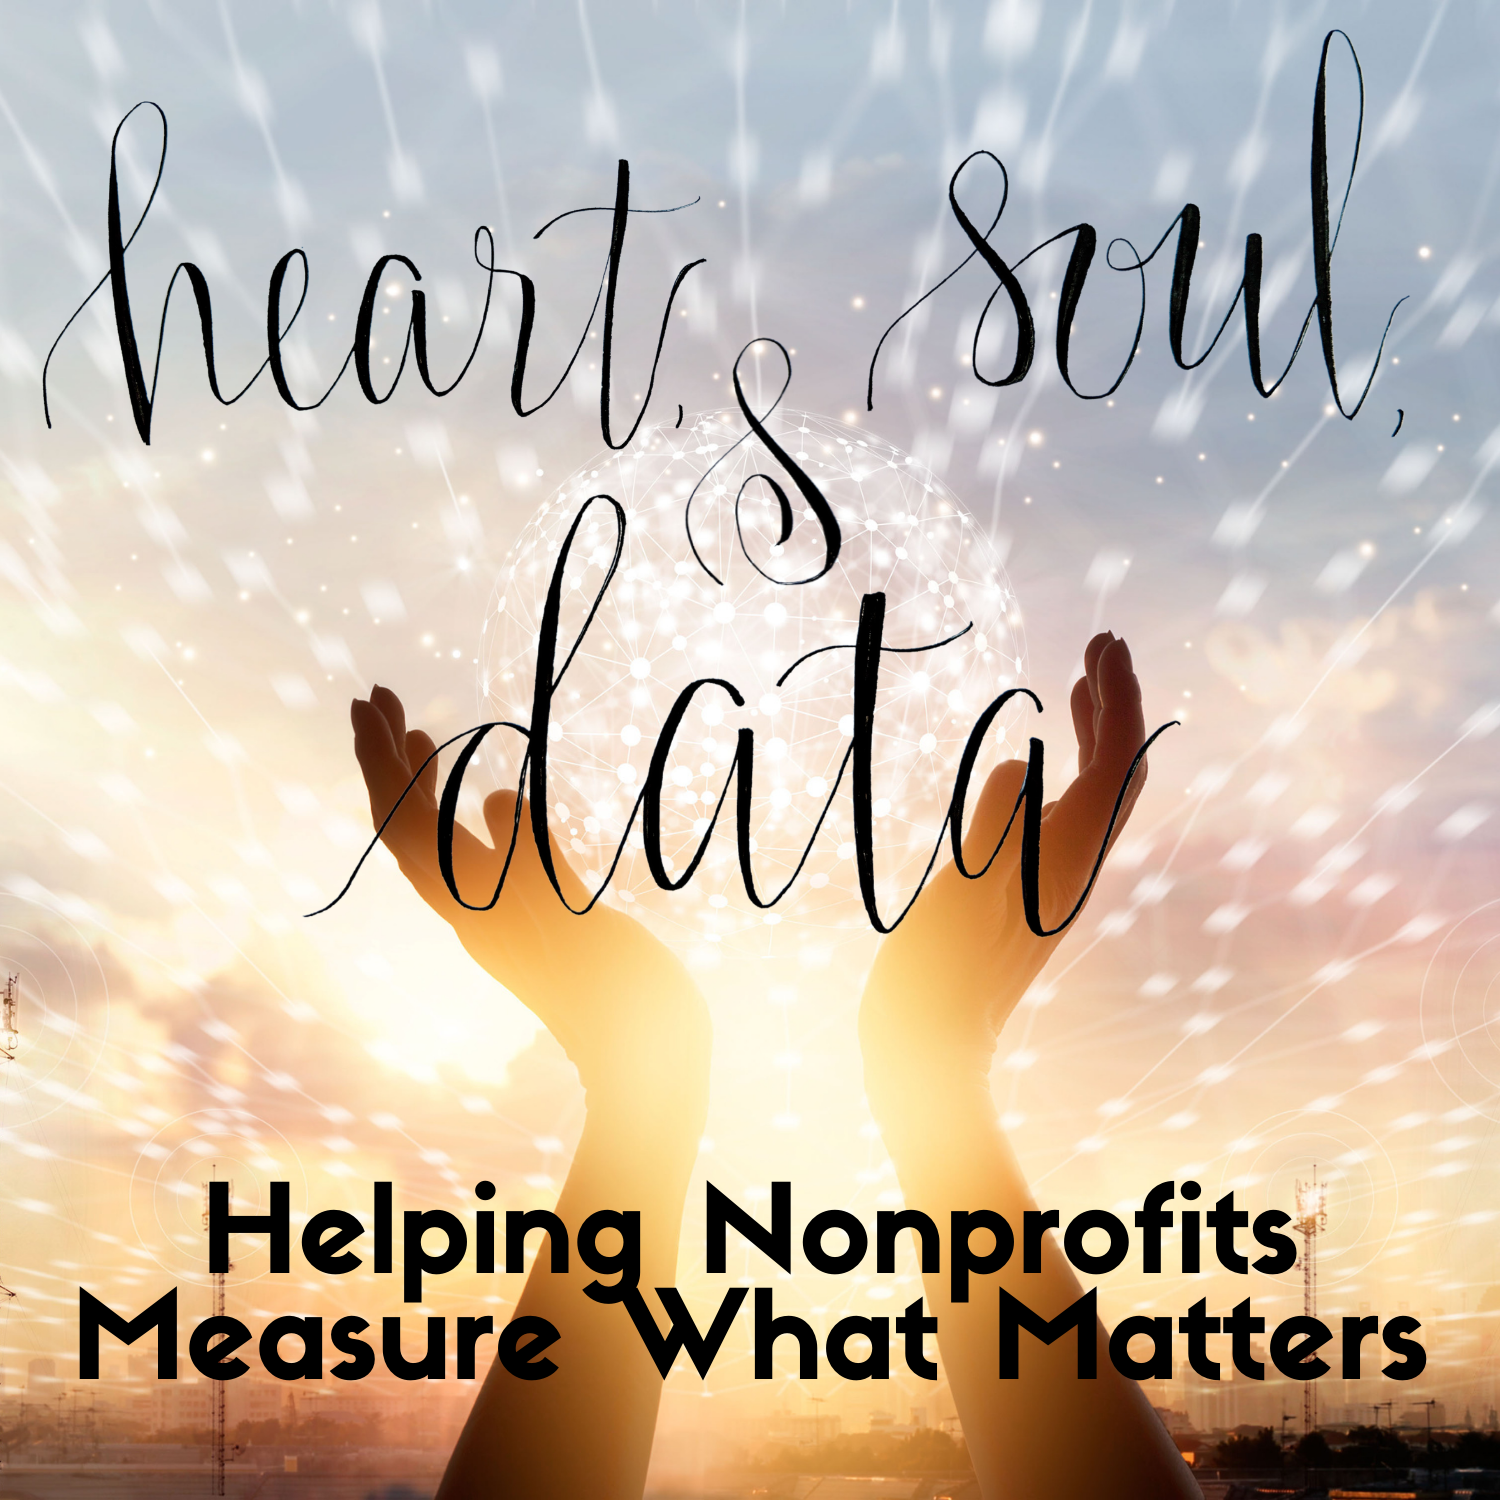 Welcome to Heart, Soul & Data